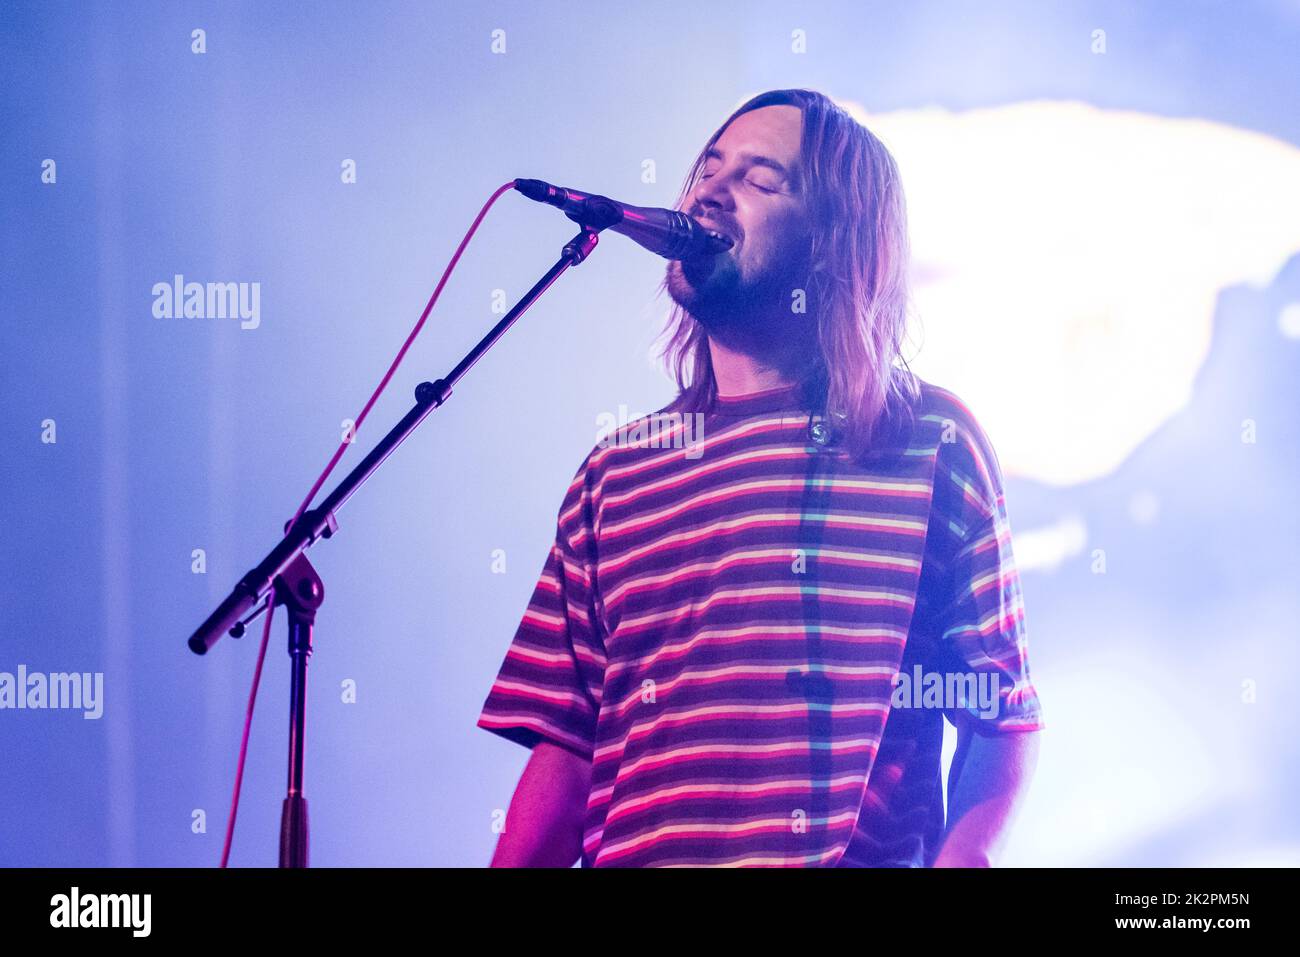 Copenhagen, Denmark. 22nd, August 2022. The Australian band Tame Impala performs a live concert Royal Arena in Copenhagen. Here singer and musician Kevin Parker is seen live on stage. (Photo credit: Gonzales Photo - Bo Kallberg). Stock Photo